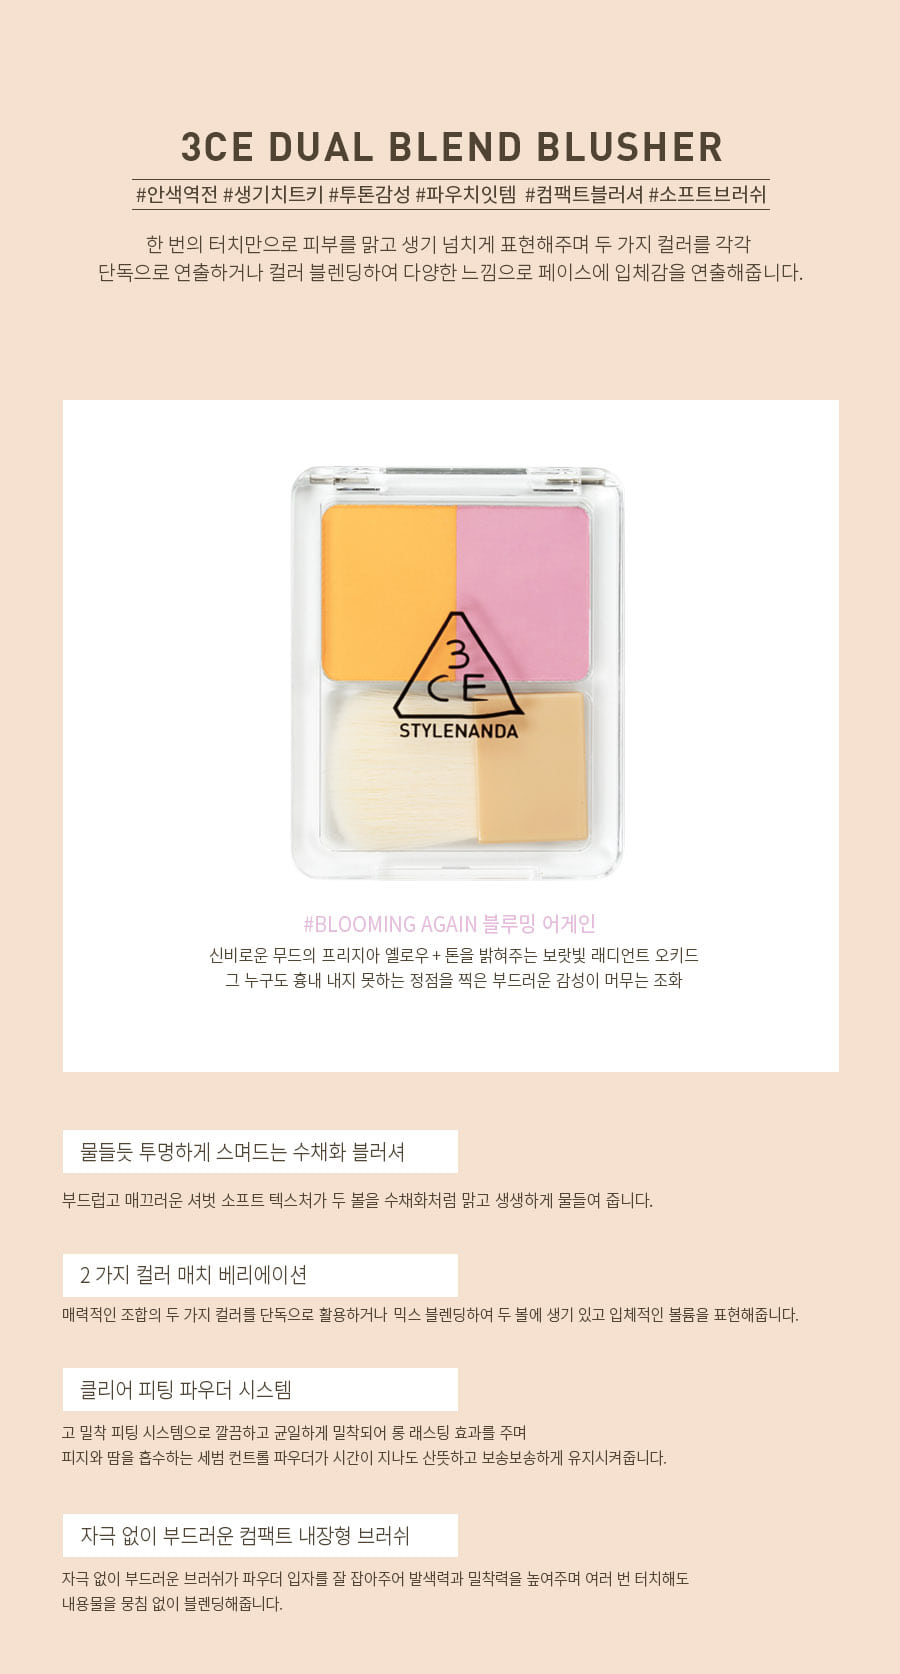 3CE DUAL BLEND BLUSHER #BLOOMING AGAIN - Beautykoreahouse